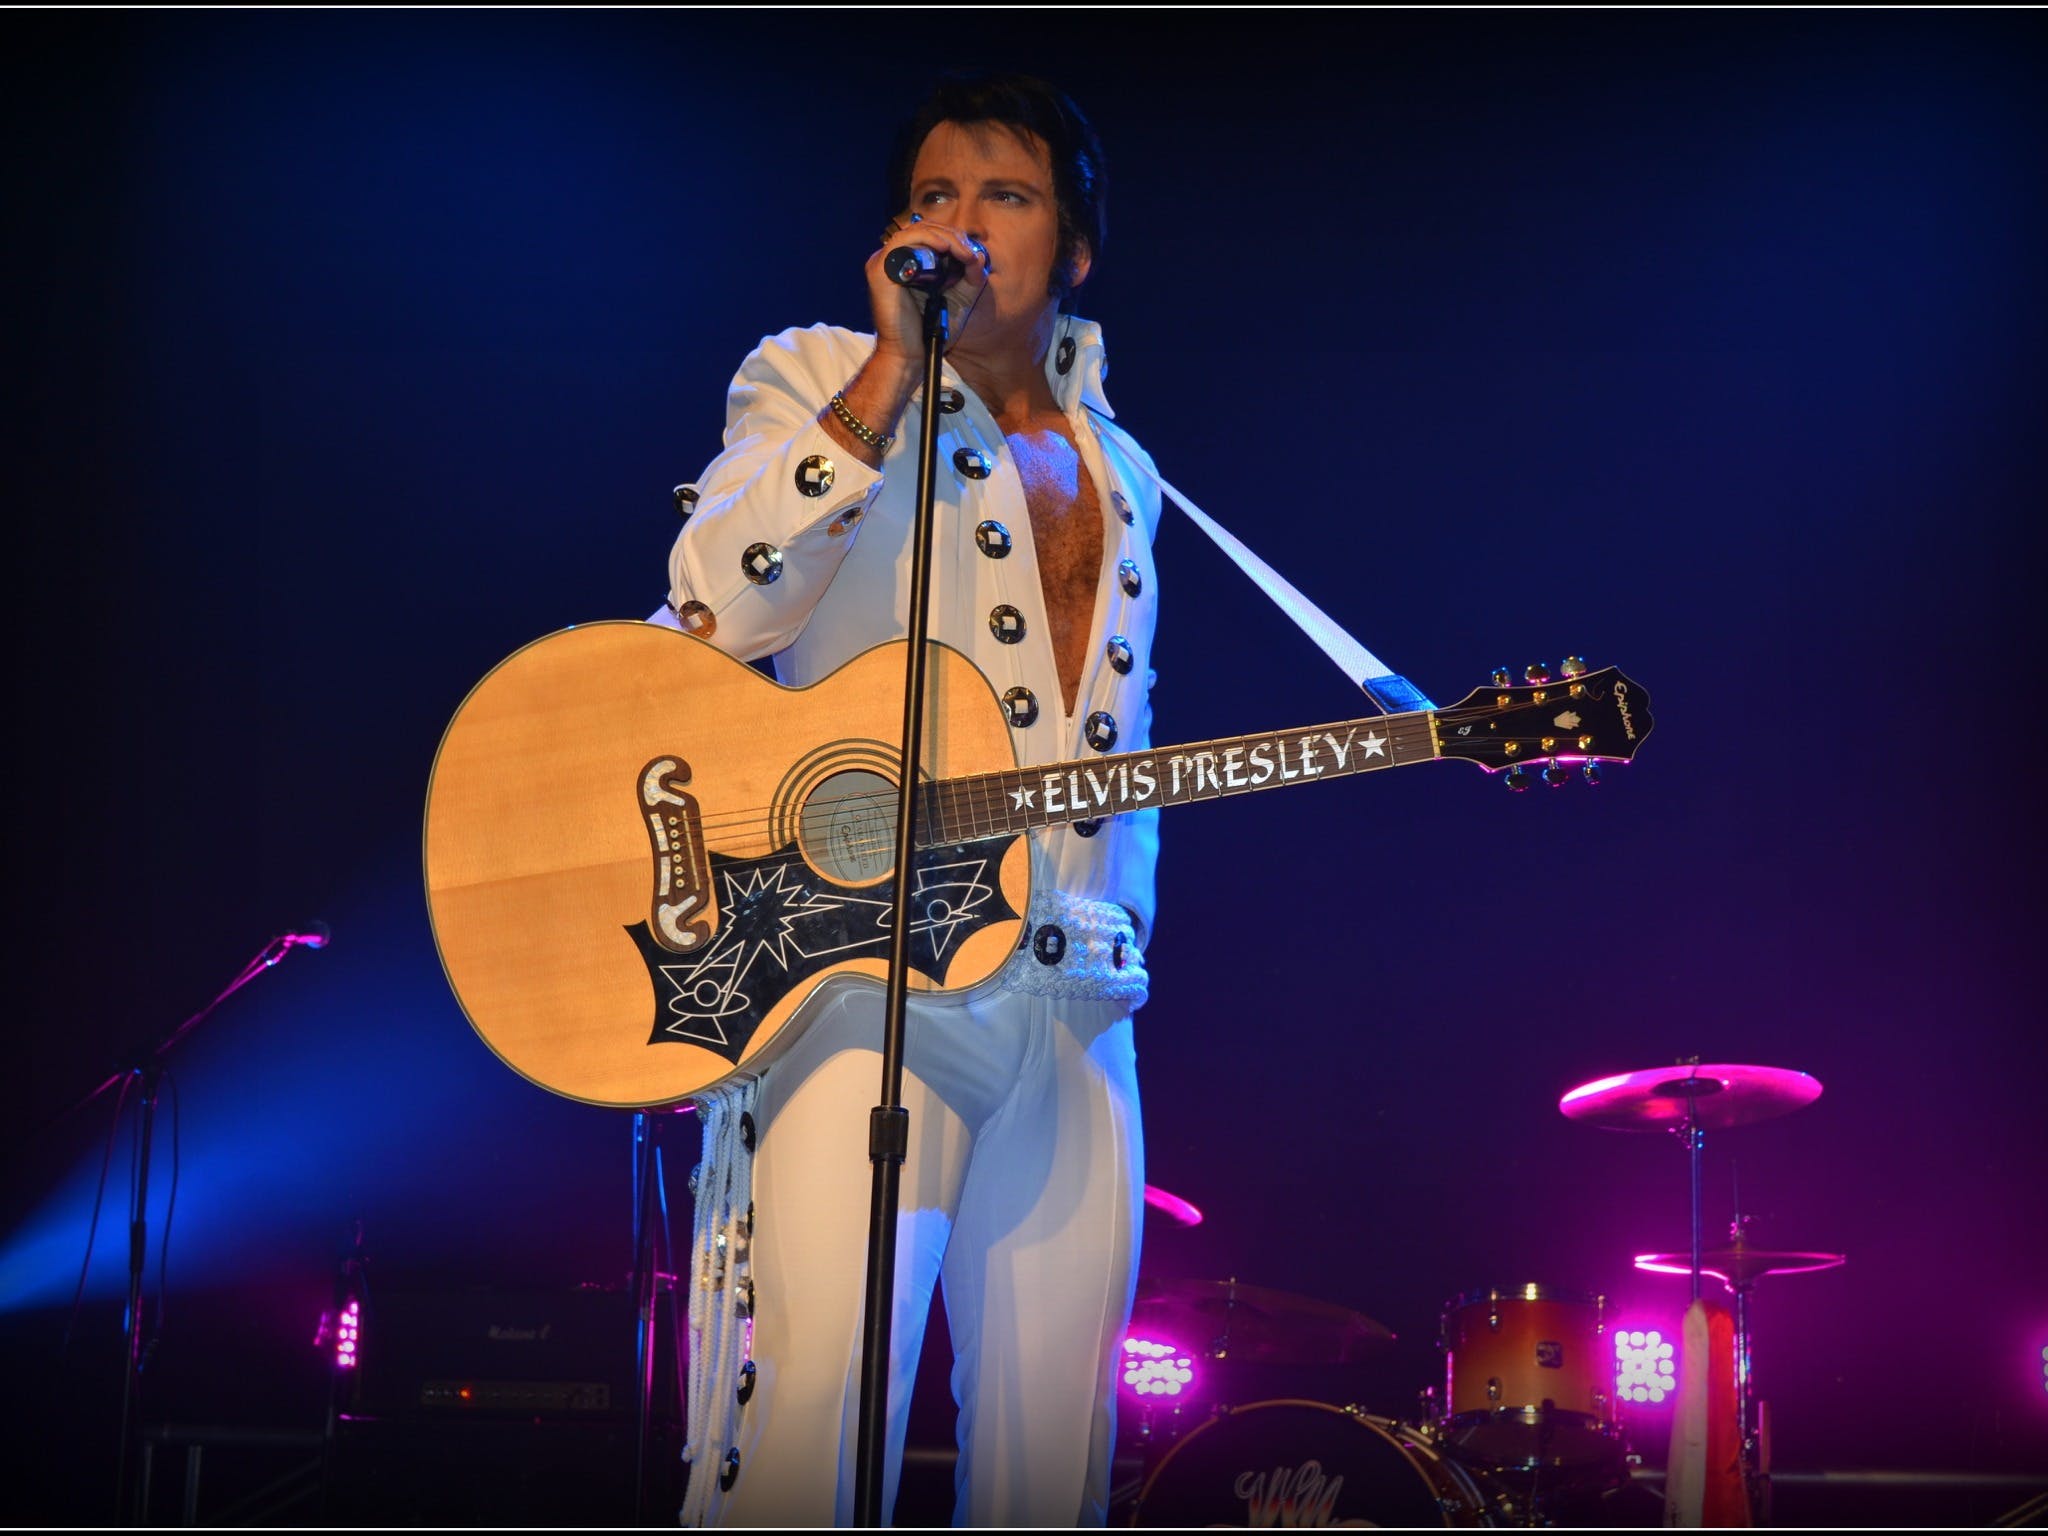 Elvis Forever - Damian Mullin 'Up Close and Personal' - Accommodation Brunswick Heads